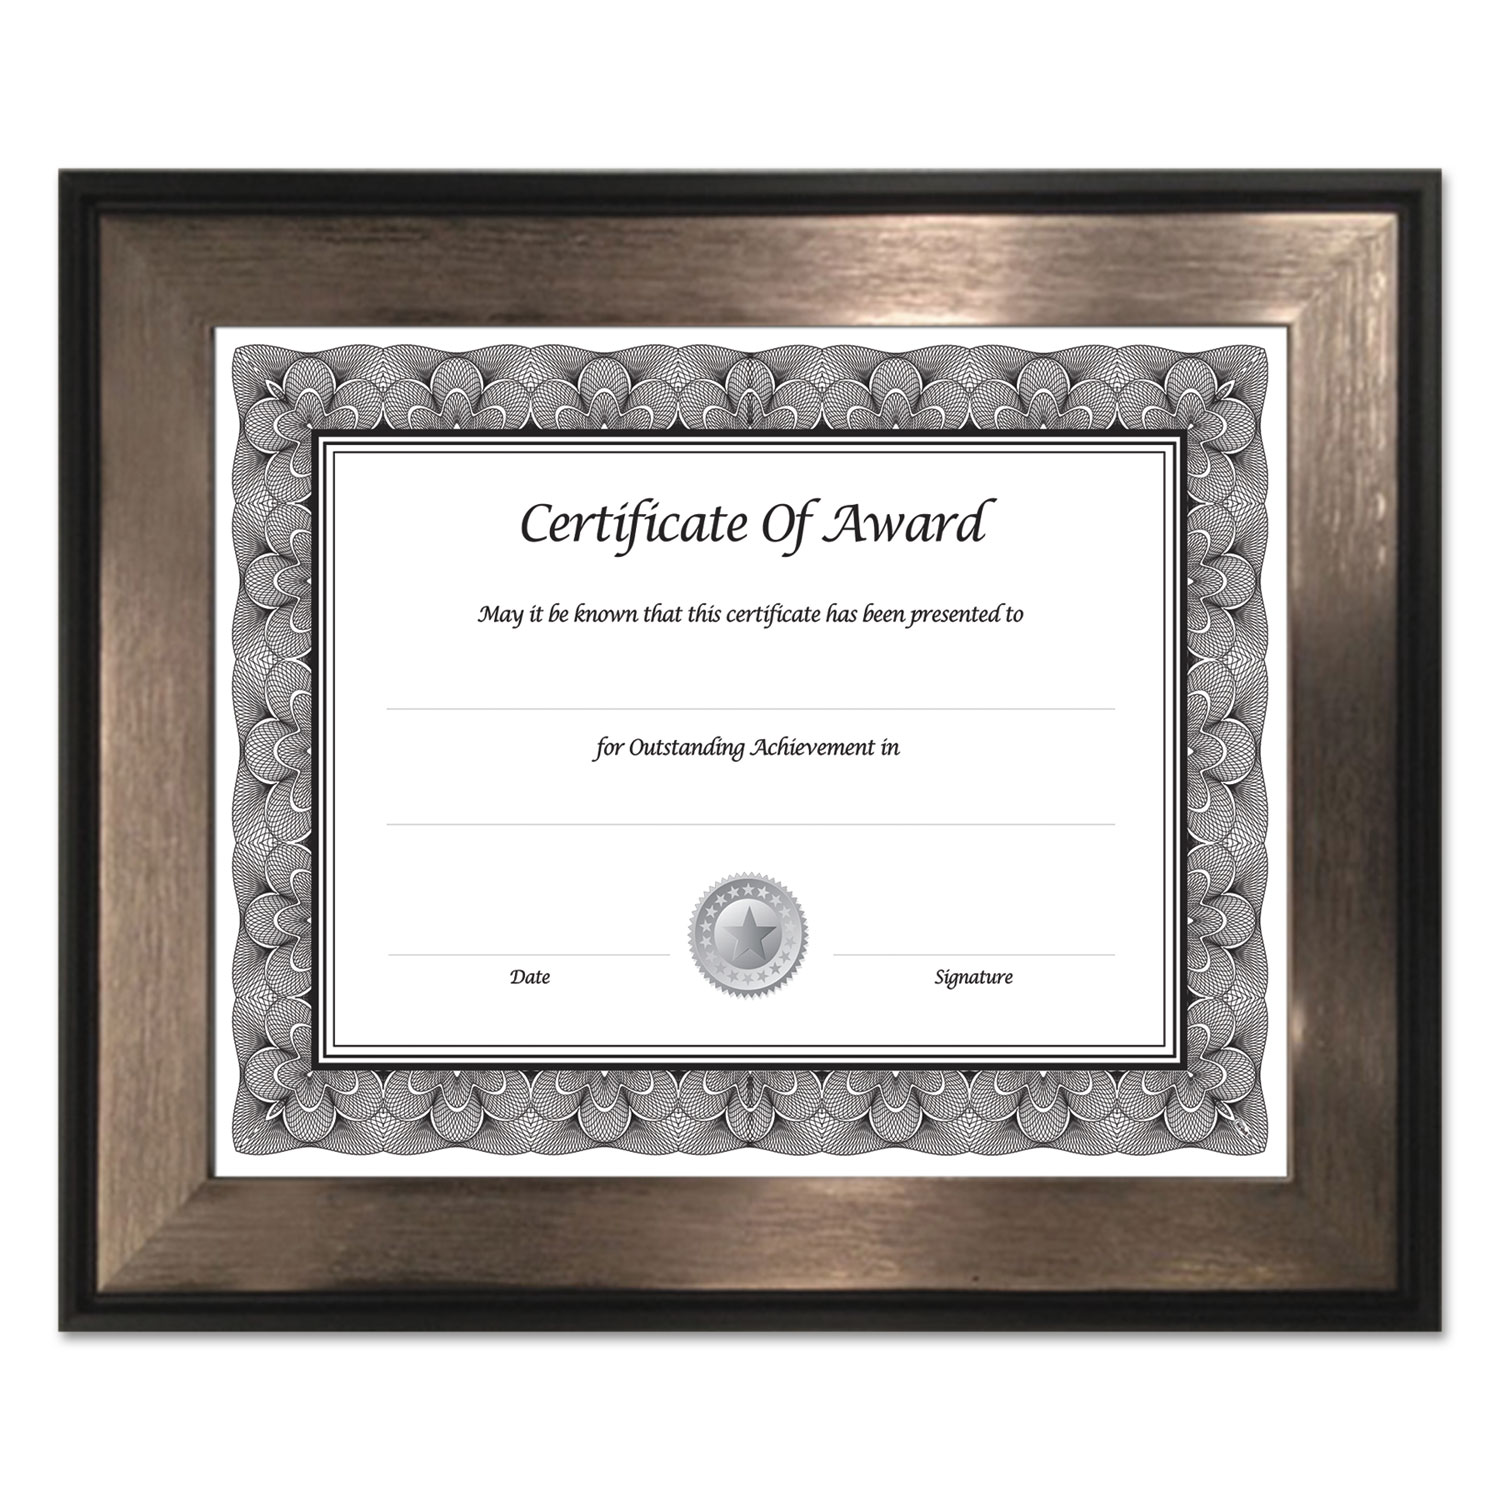  NuDell 15151 Director Series Document and Photo Frame, 8 1/2 x 11, Black/Pewter Frame (NUD15151) 